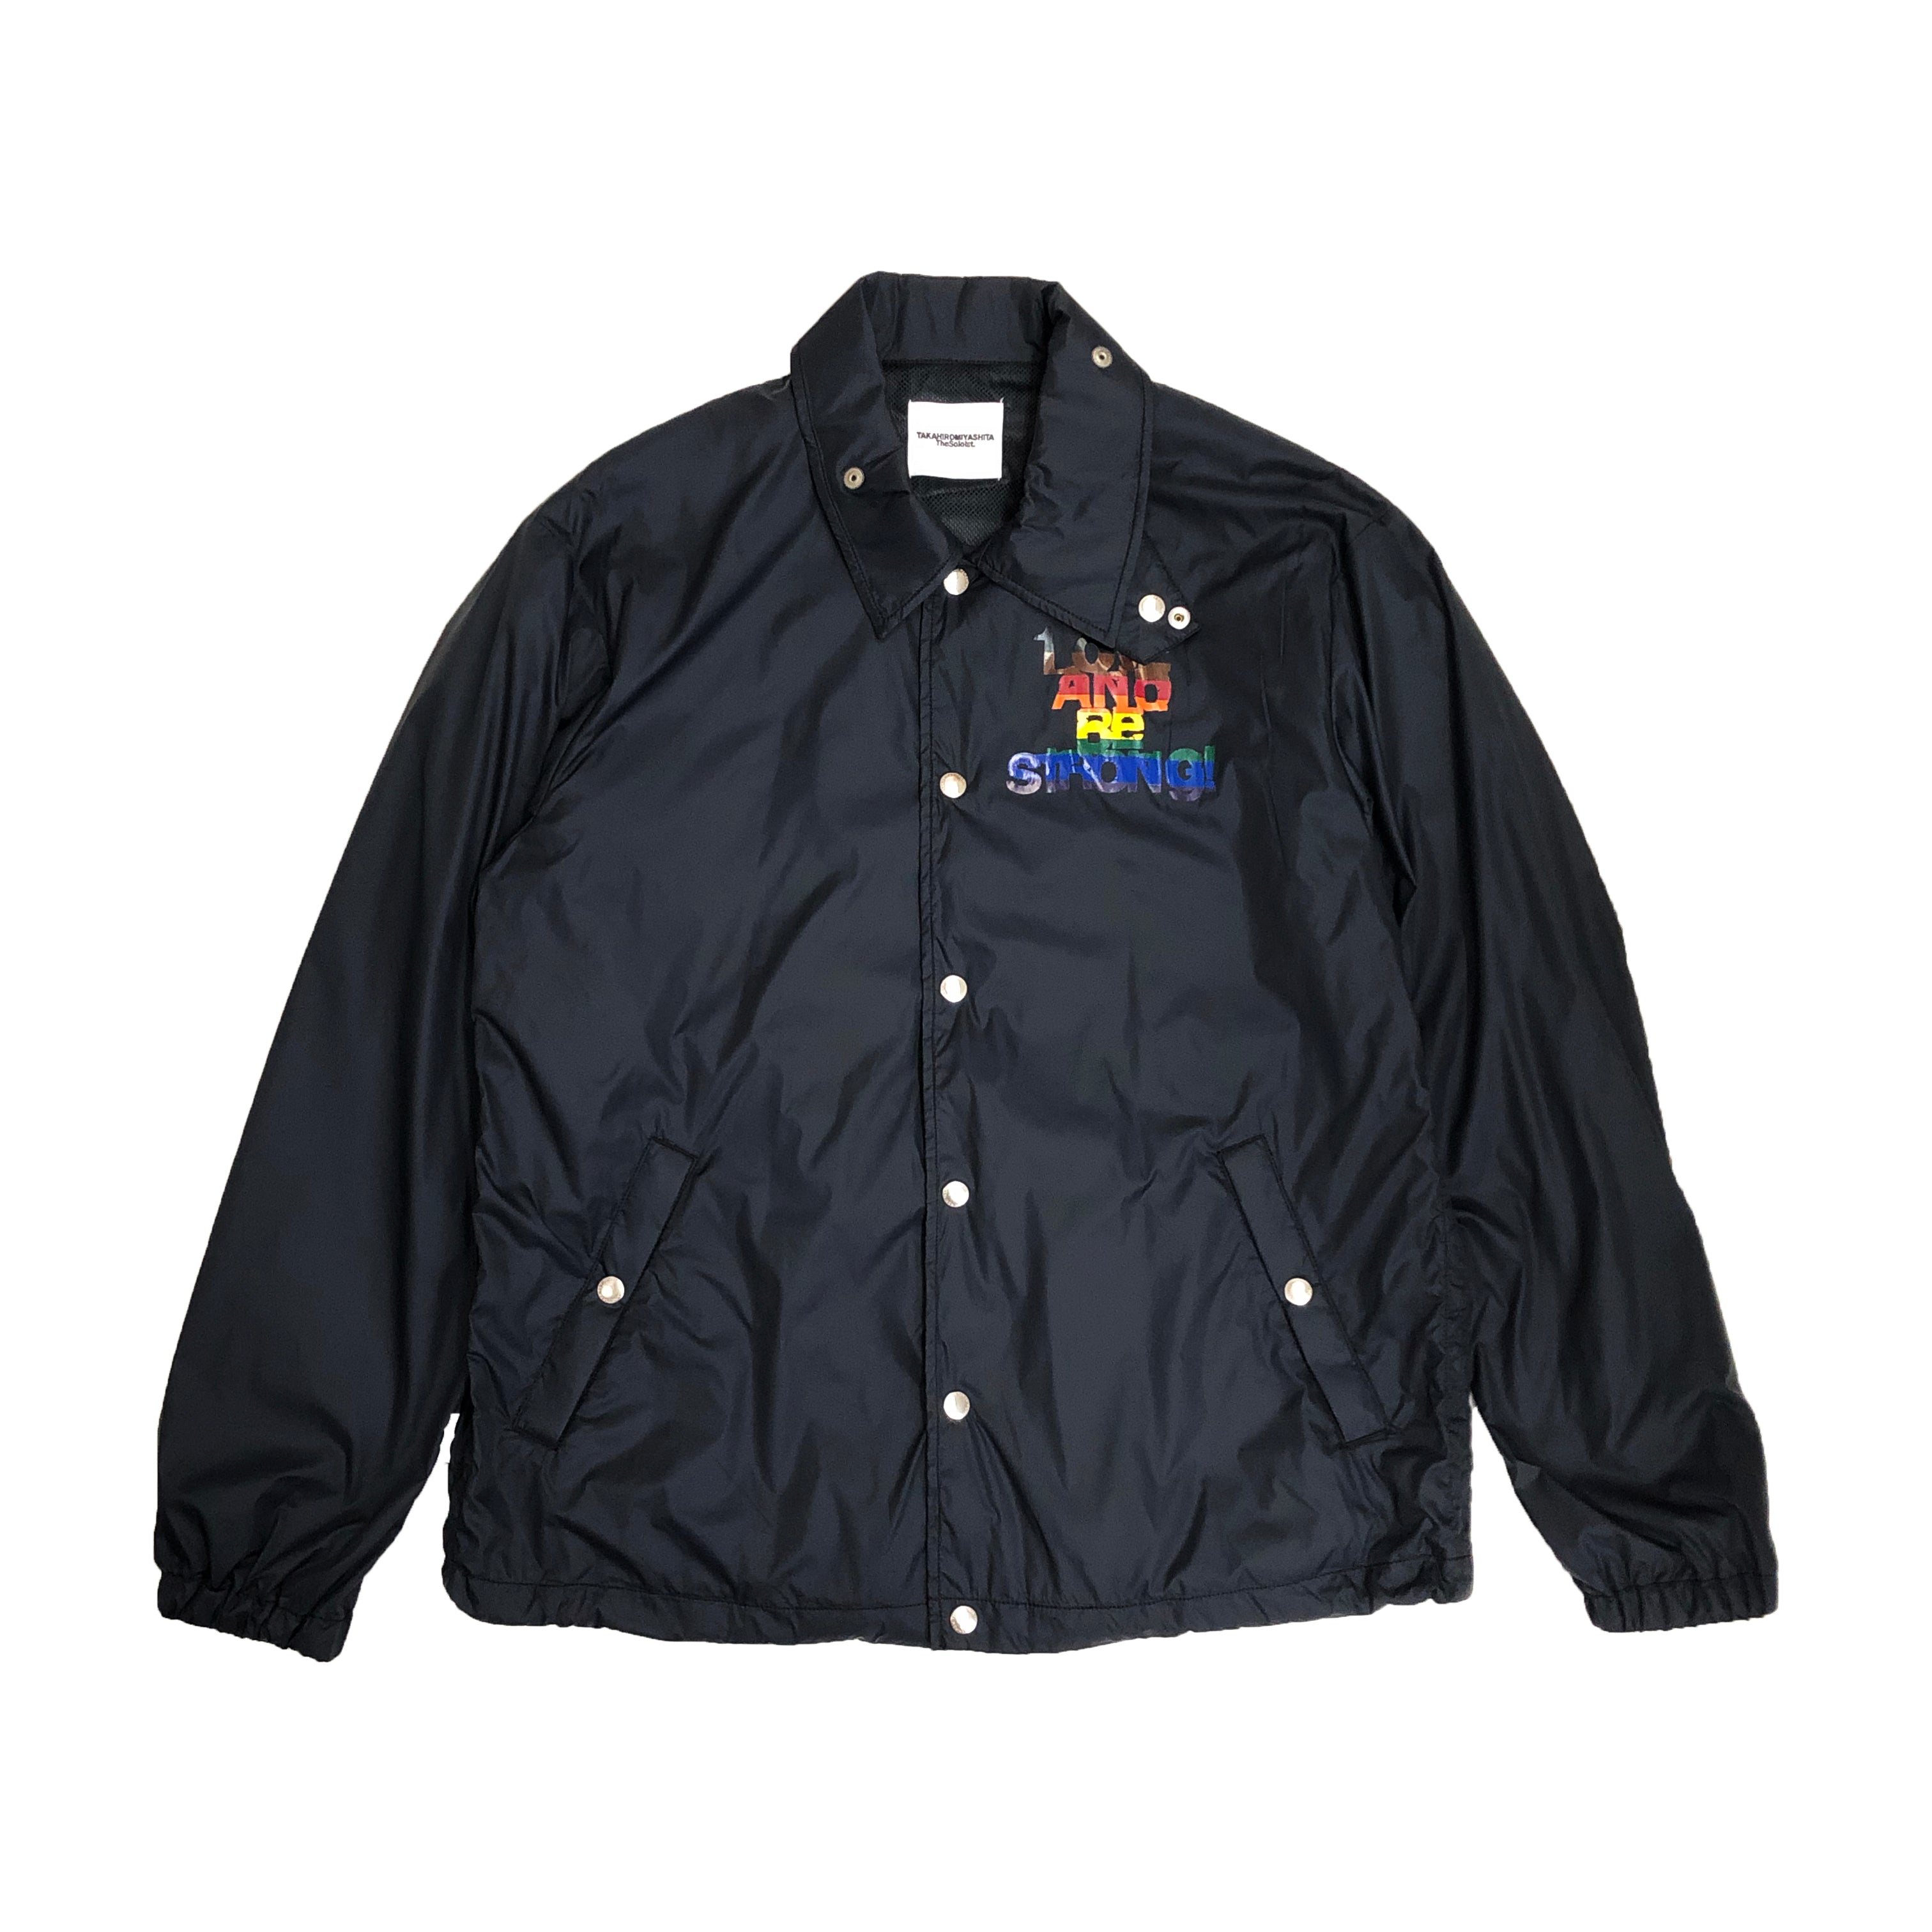 THE SOLOIST. LOVE AND BE STRONG COACH JACKET